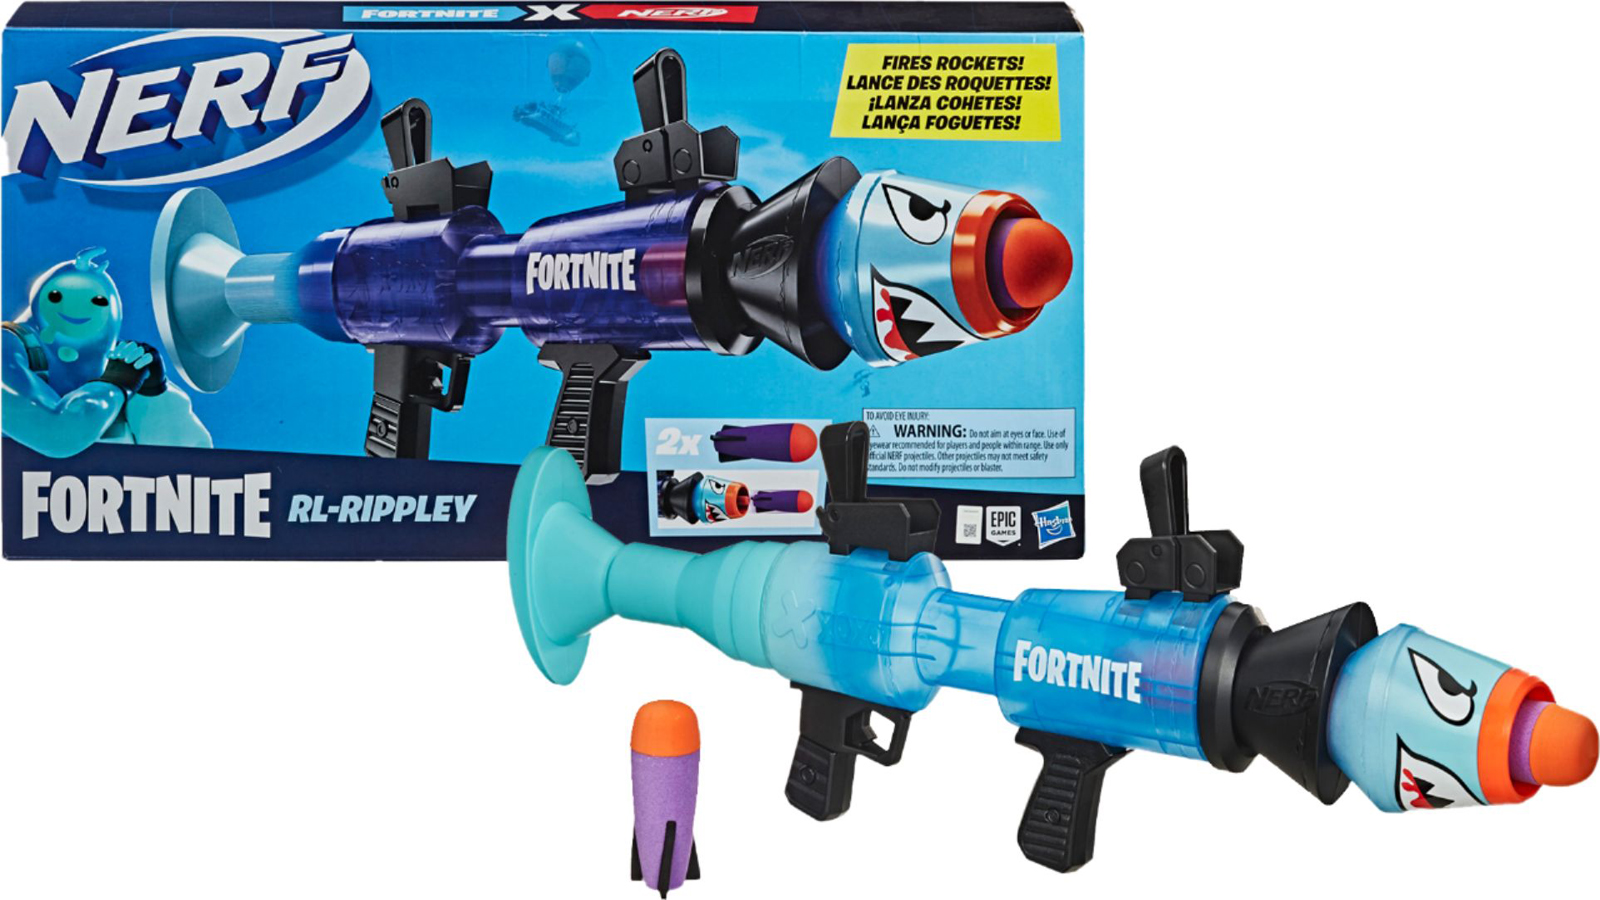 Save a whopping 40% the Fortnite Rocket Launcher in this early